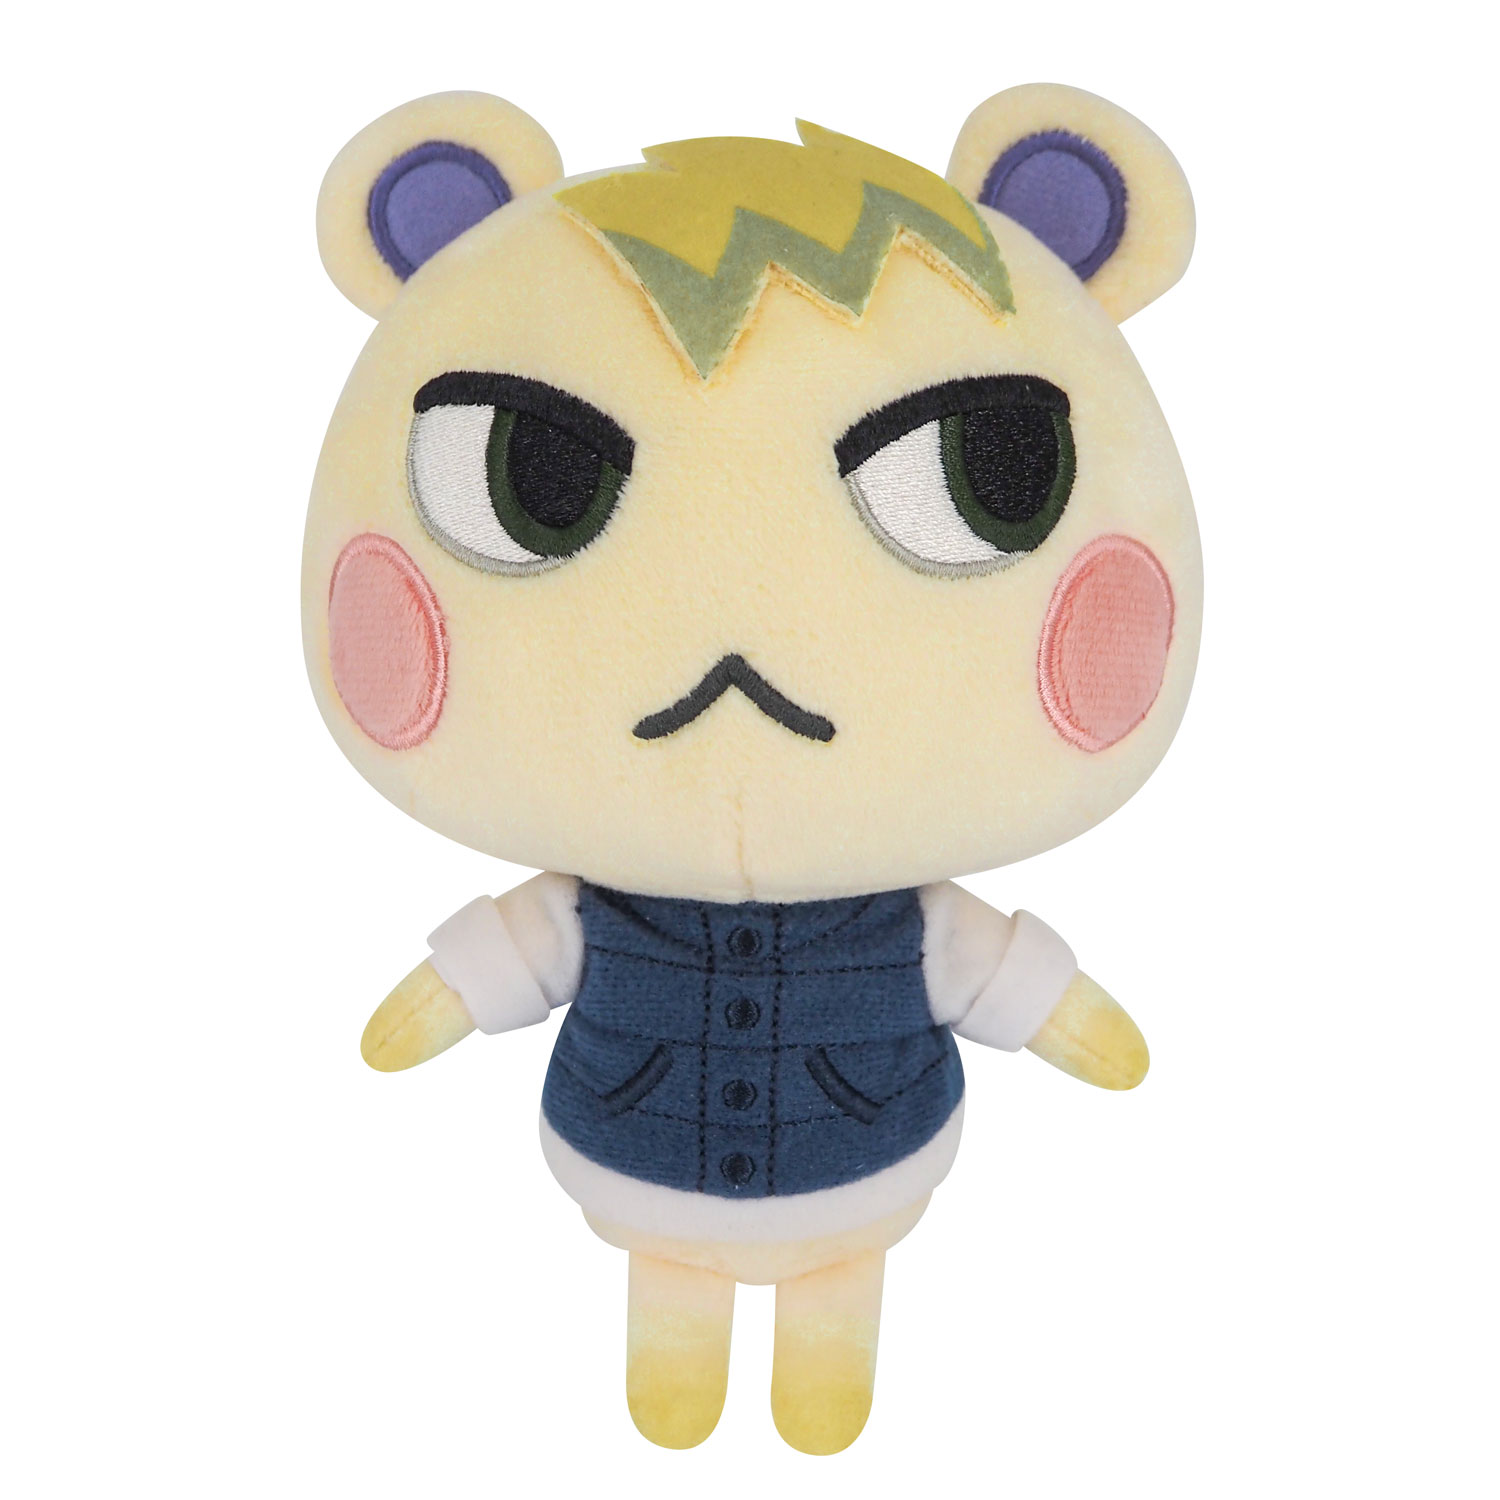 Five New Adorable Animal Crossing Villager Plushies Are Coming Soon  (Officially Licensed) - Animal Crossing World